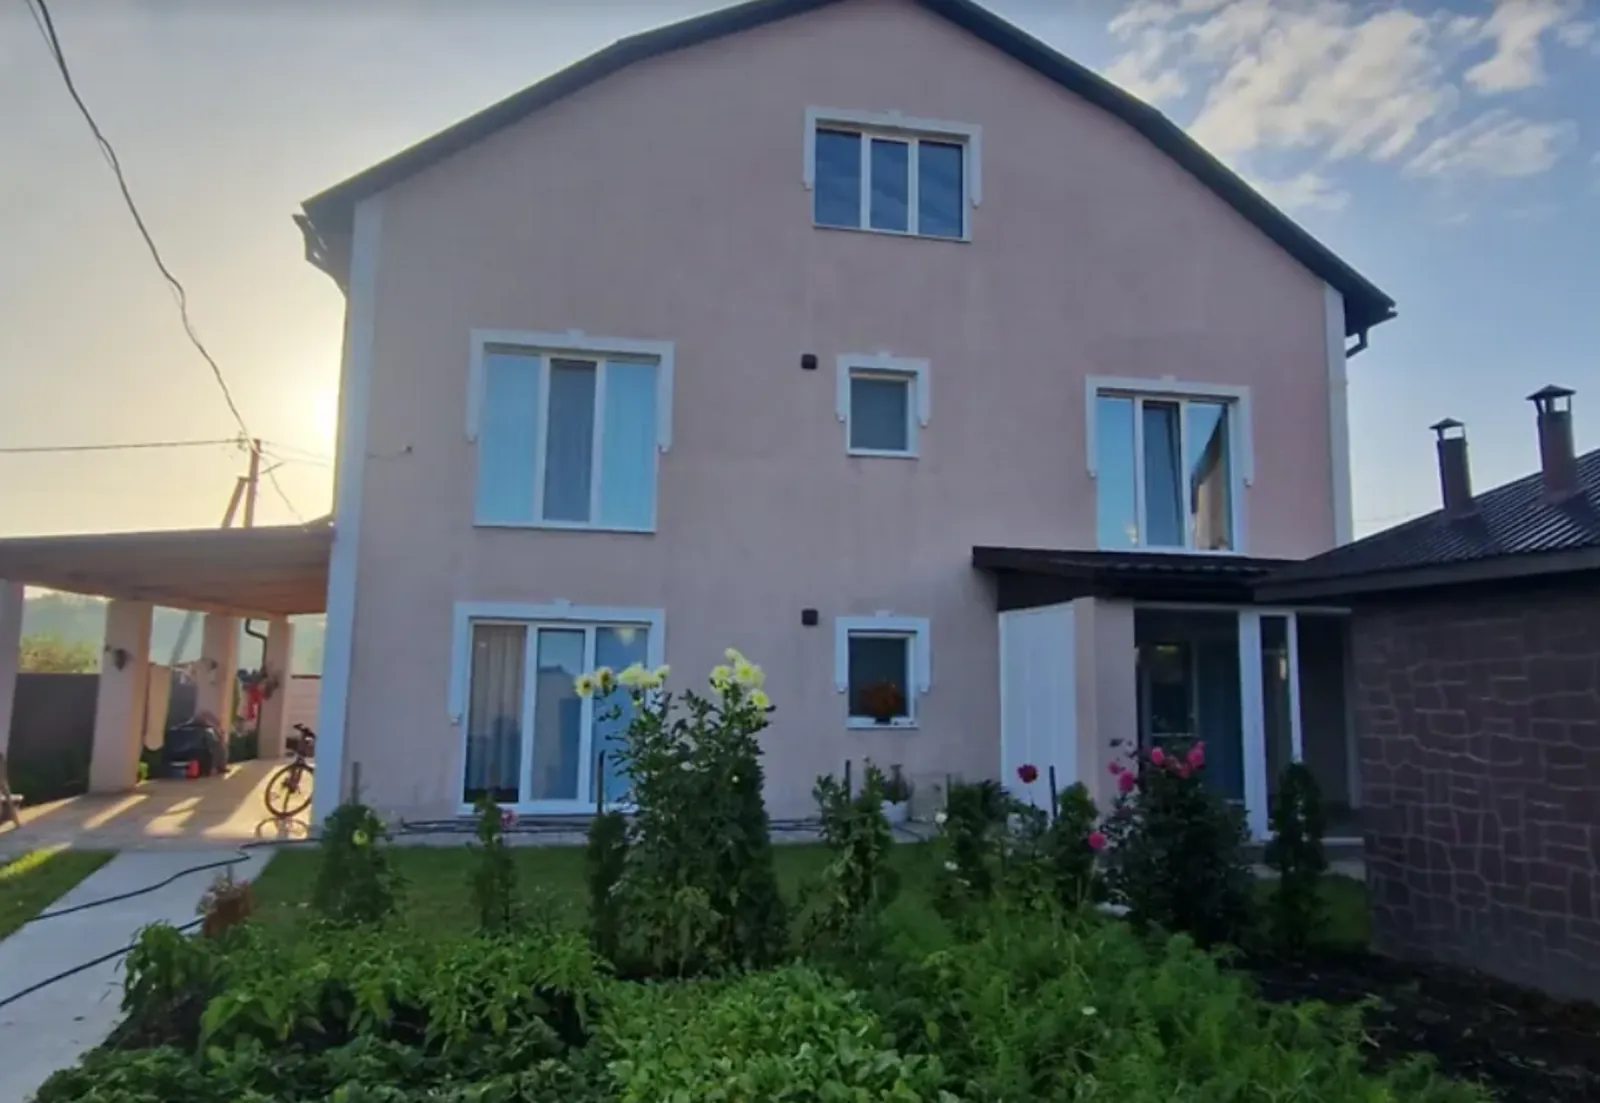 House for sale. 200 m², 2 floors. Petrykov. 